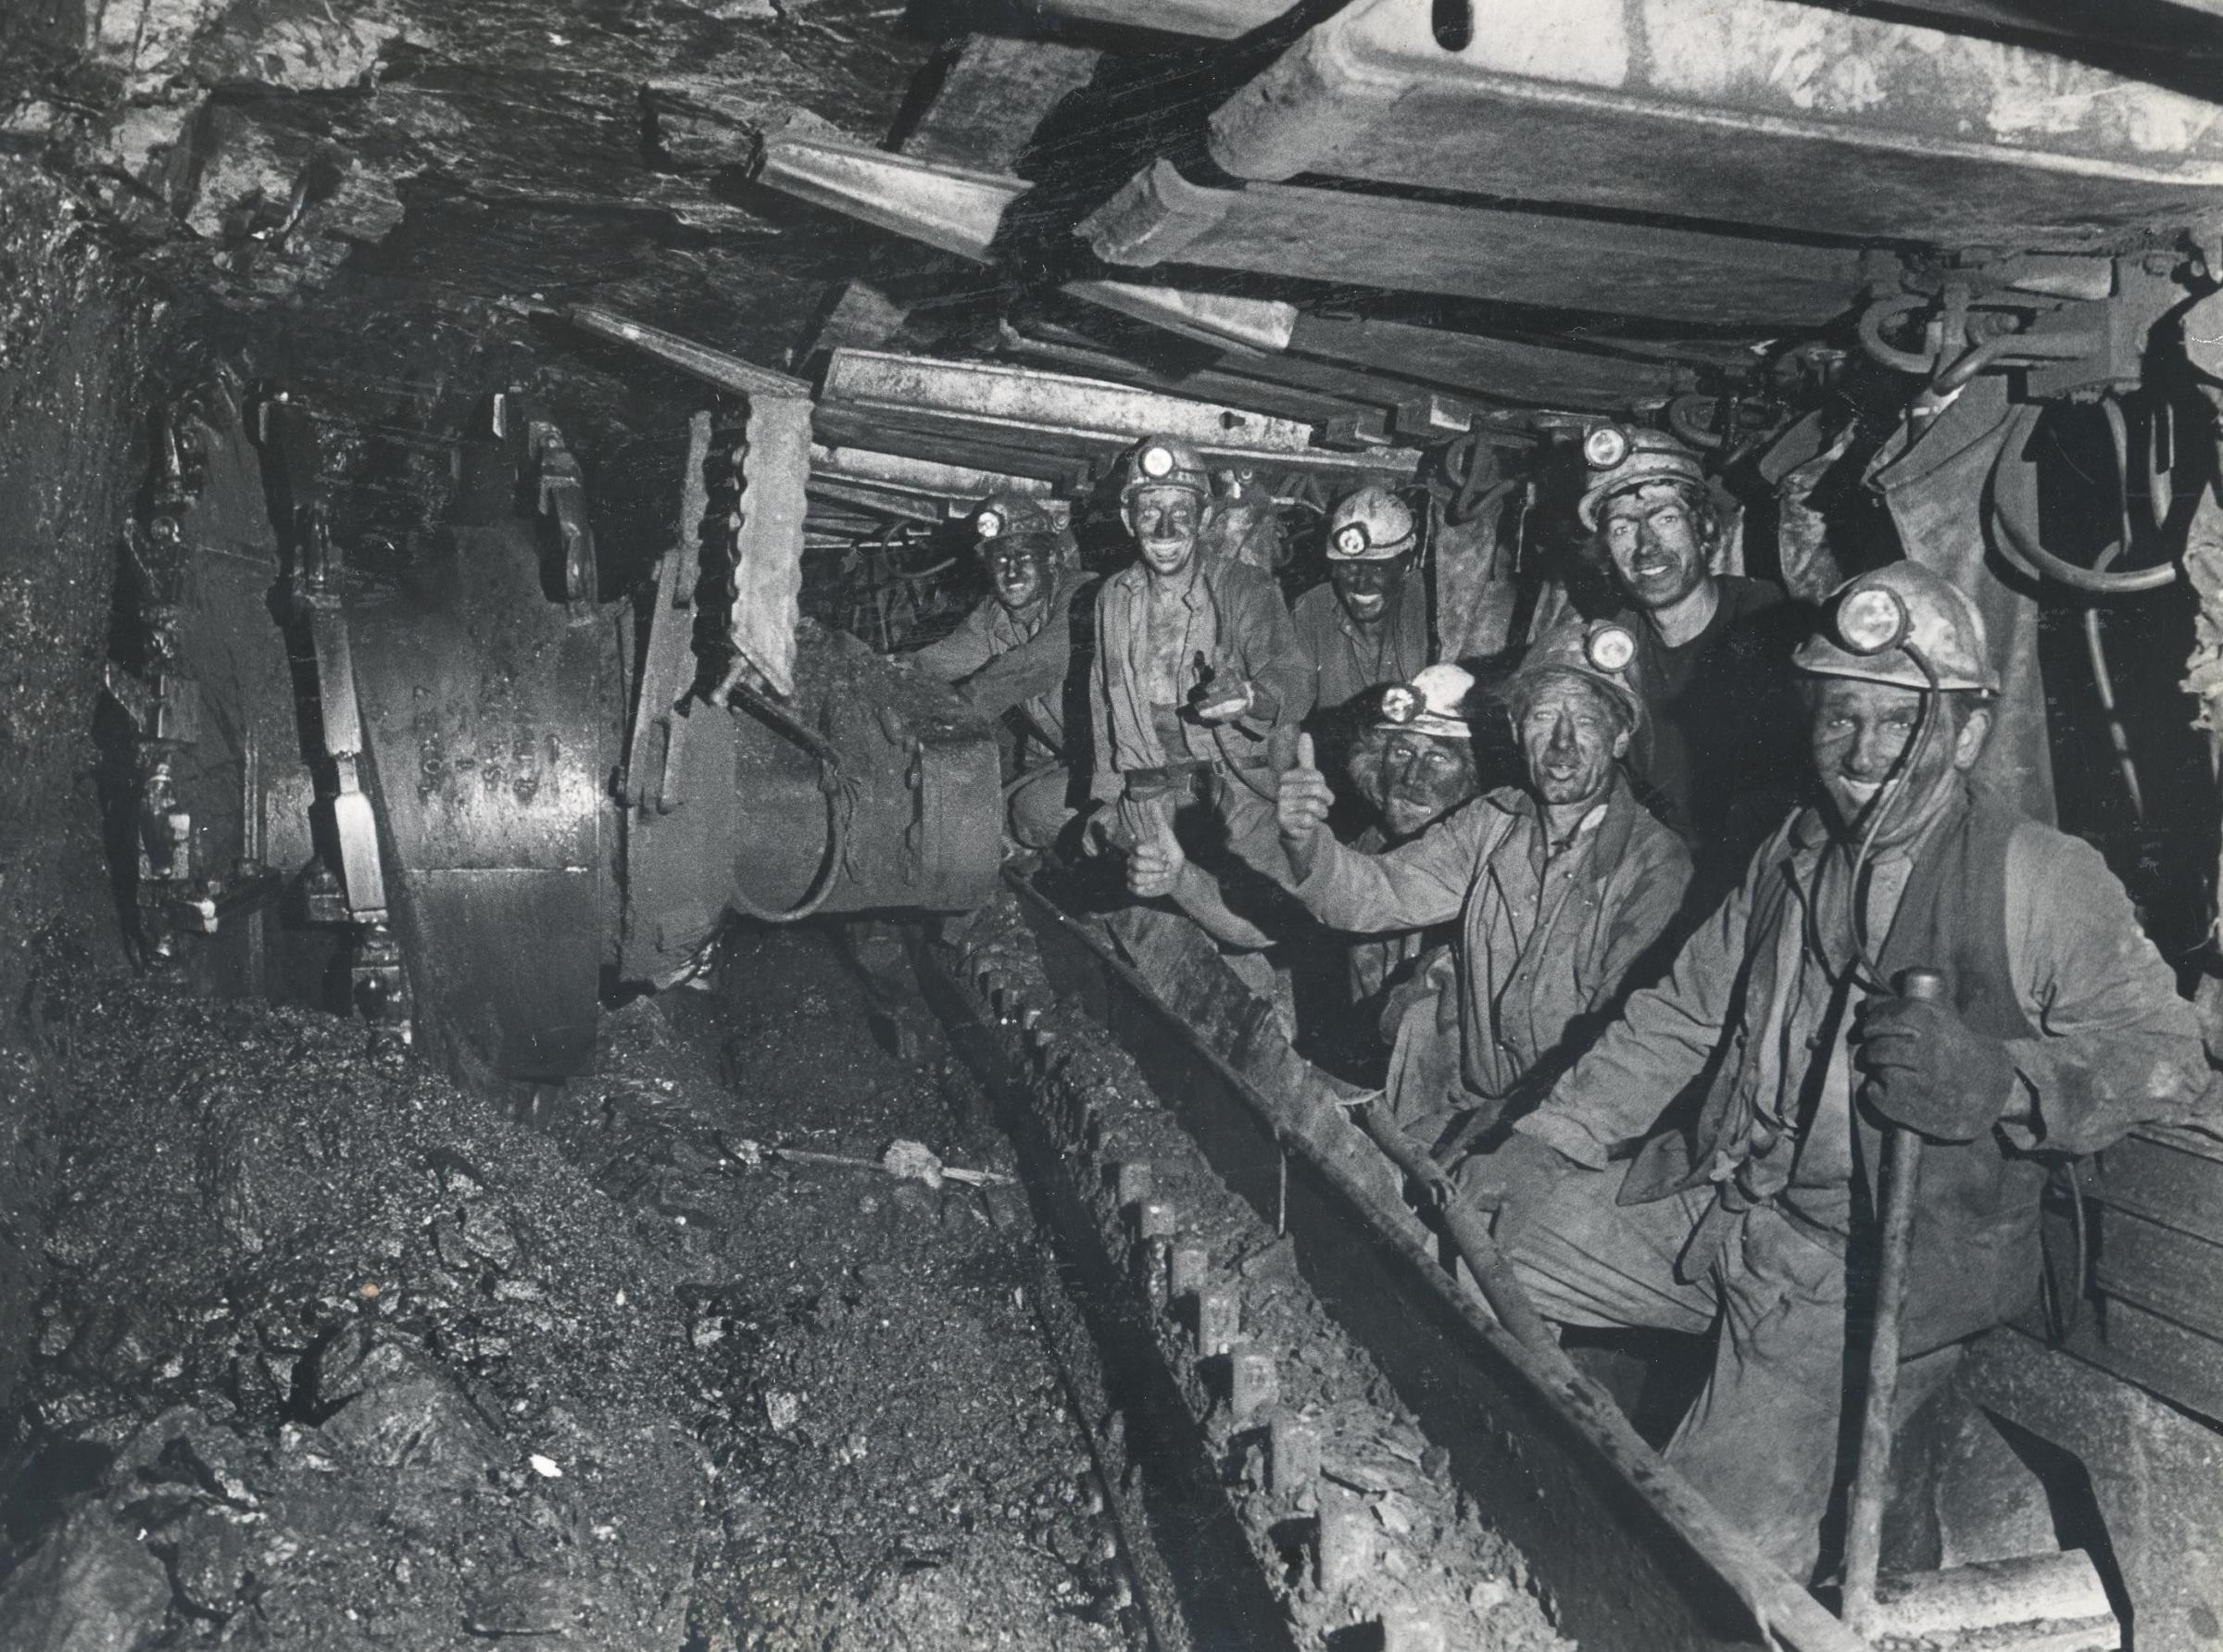 Former coal mining communities can apply for £10,000 grants